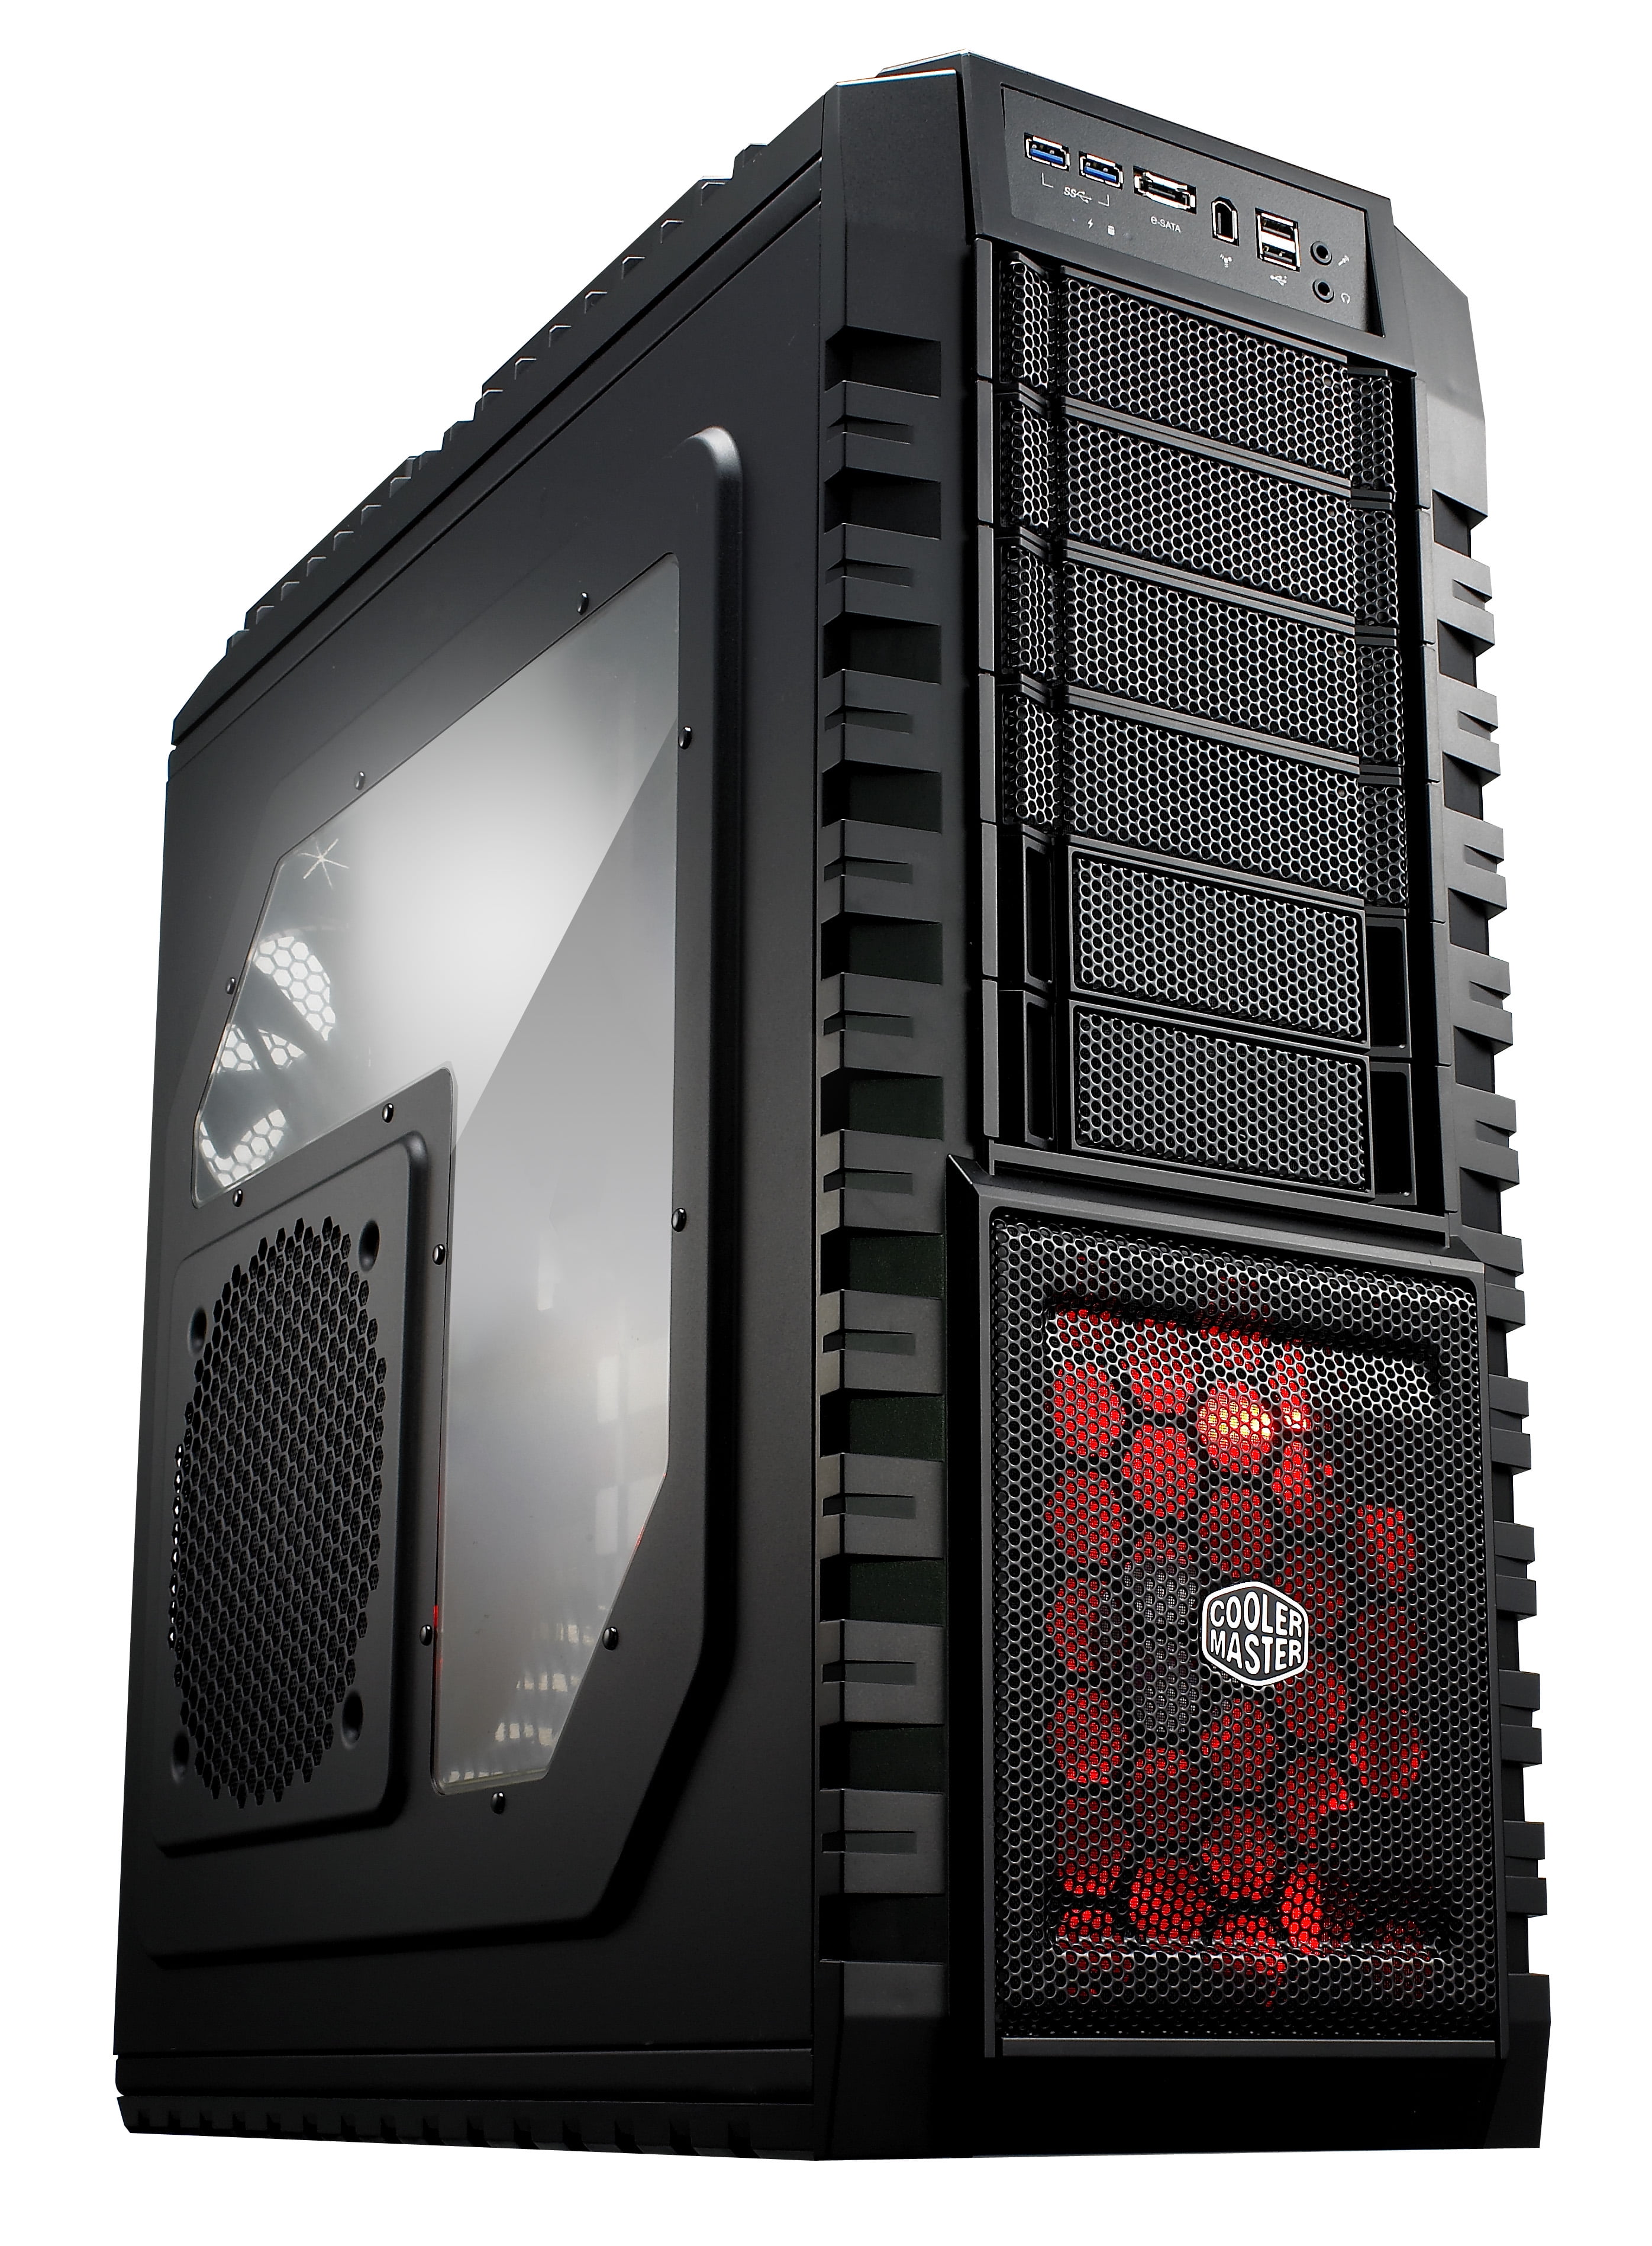 Cooler Master Haf X Full Tower Computer Case With Usb 30 Ports And